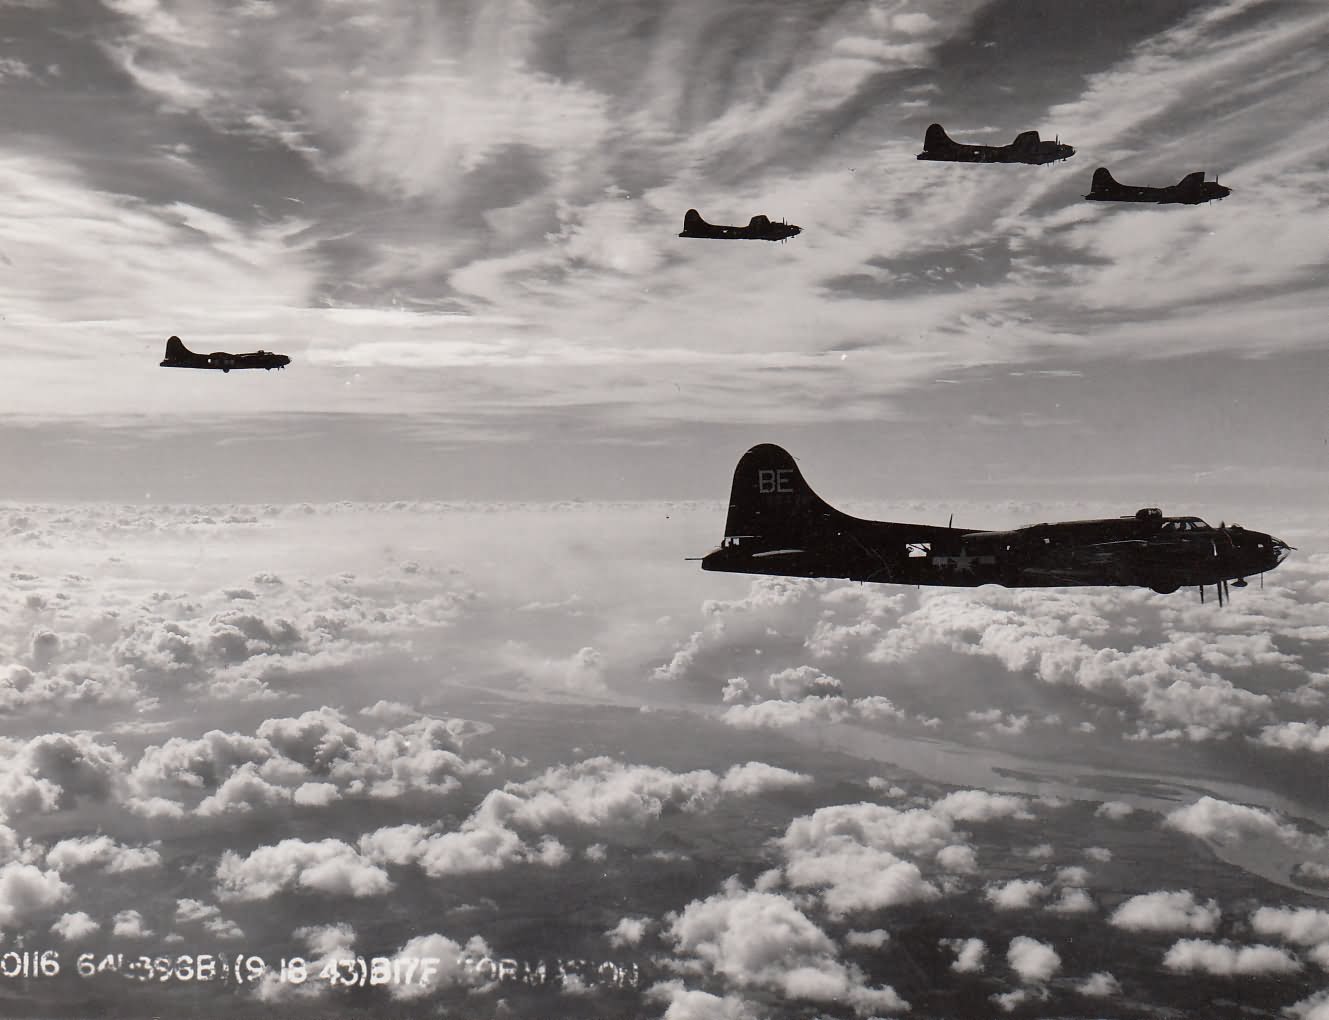 B-17_FLYING_FORTRESS_BOMBERS_in_Flight_396_BOMB_GROUP.jpg